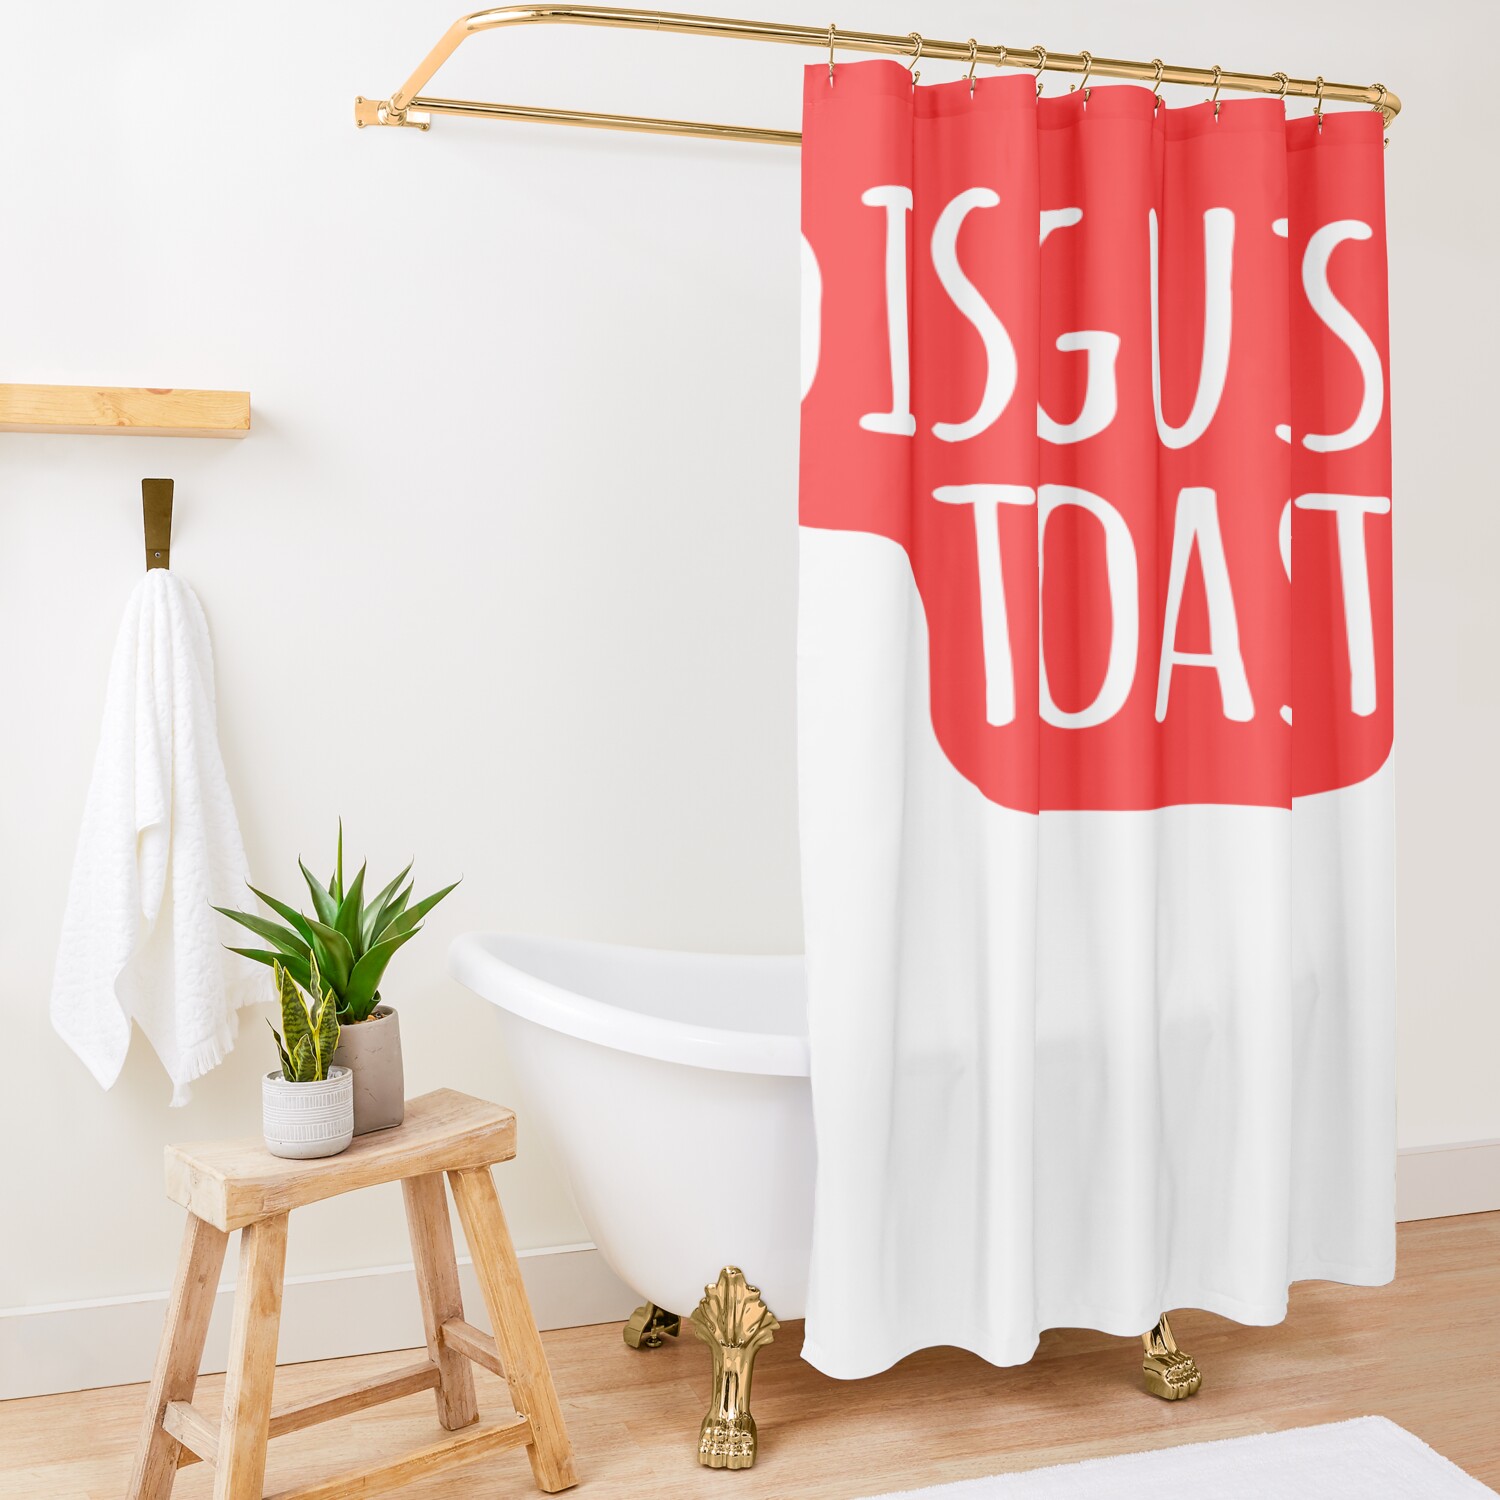 urshower curtain opensquare1500x1500 8 - Disguised Toast Shop